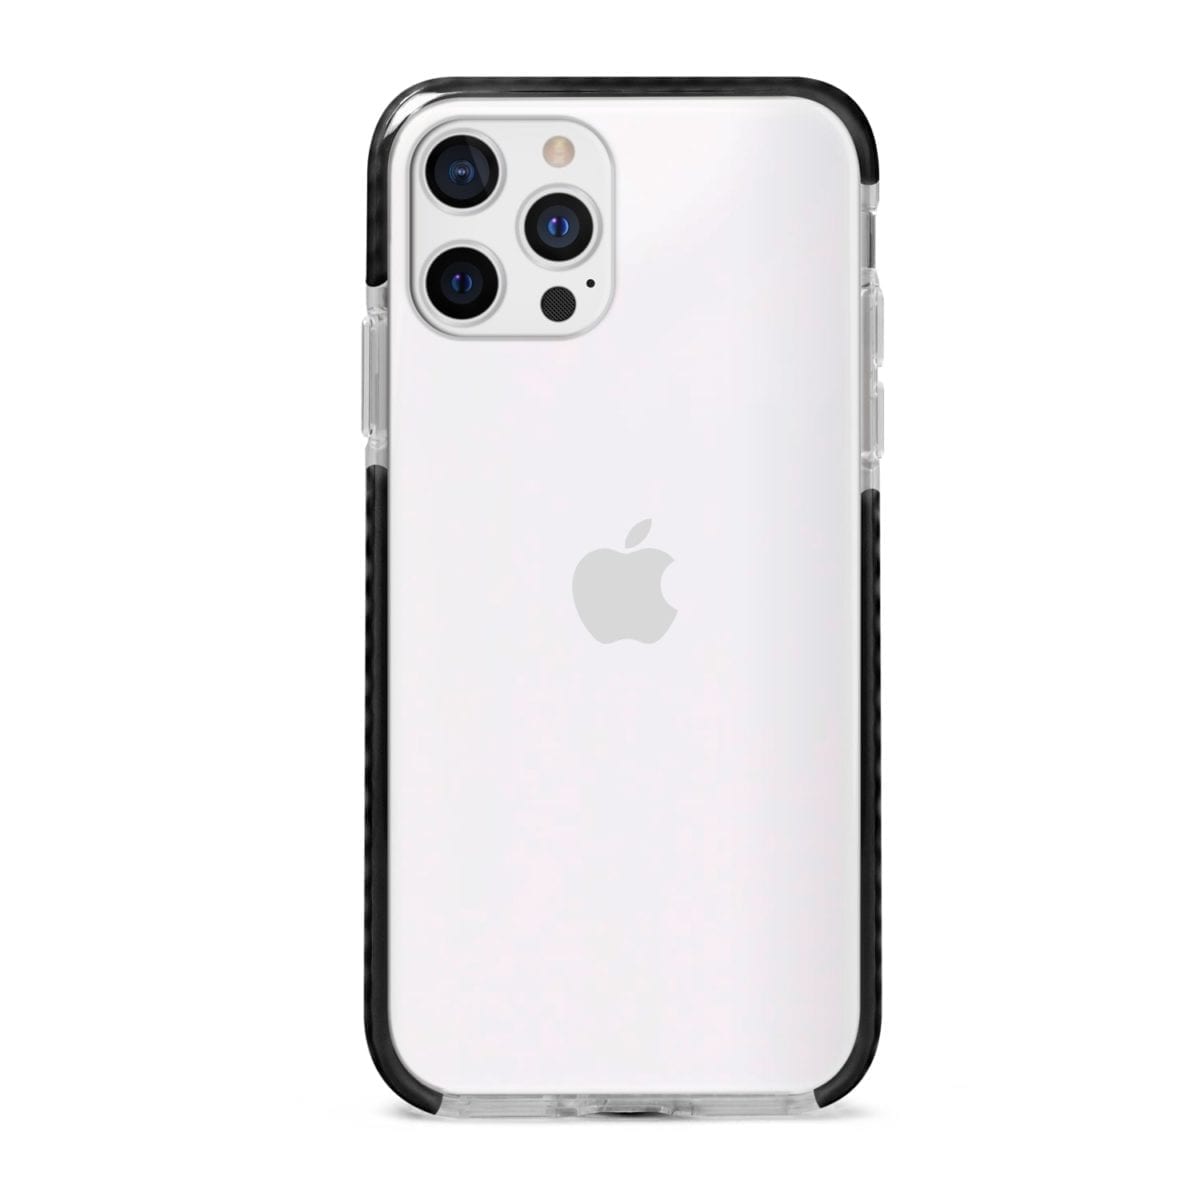 Clear View Stride Case Cover for Apple iPhone 12 Pro and Apple iPhone 12 Pro Max with great design and shock proof | Klippik | Online Shopping | Kuwait UAE Saudi